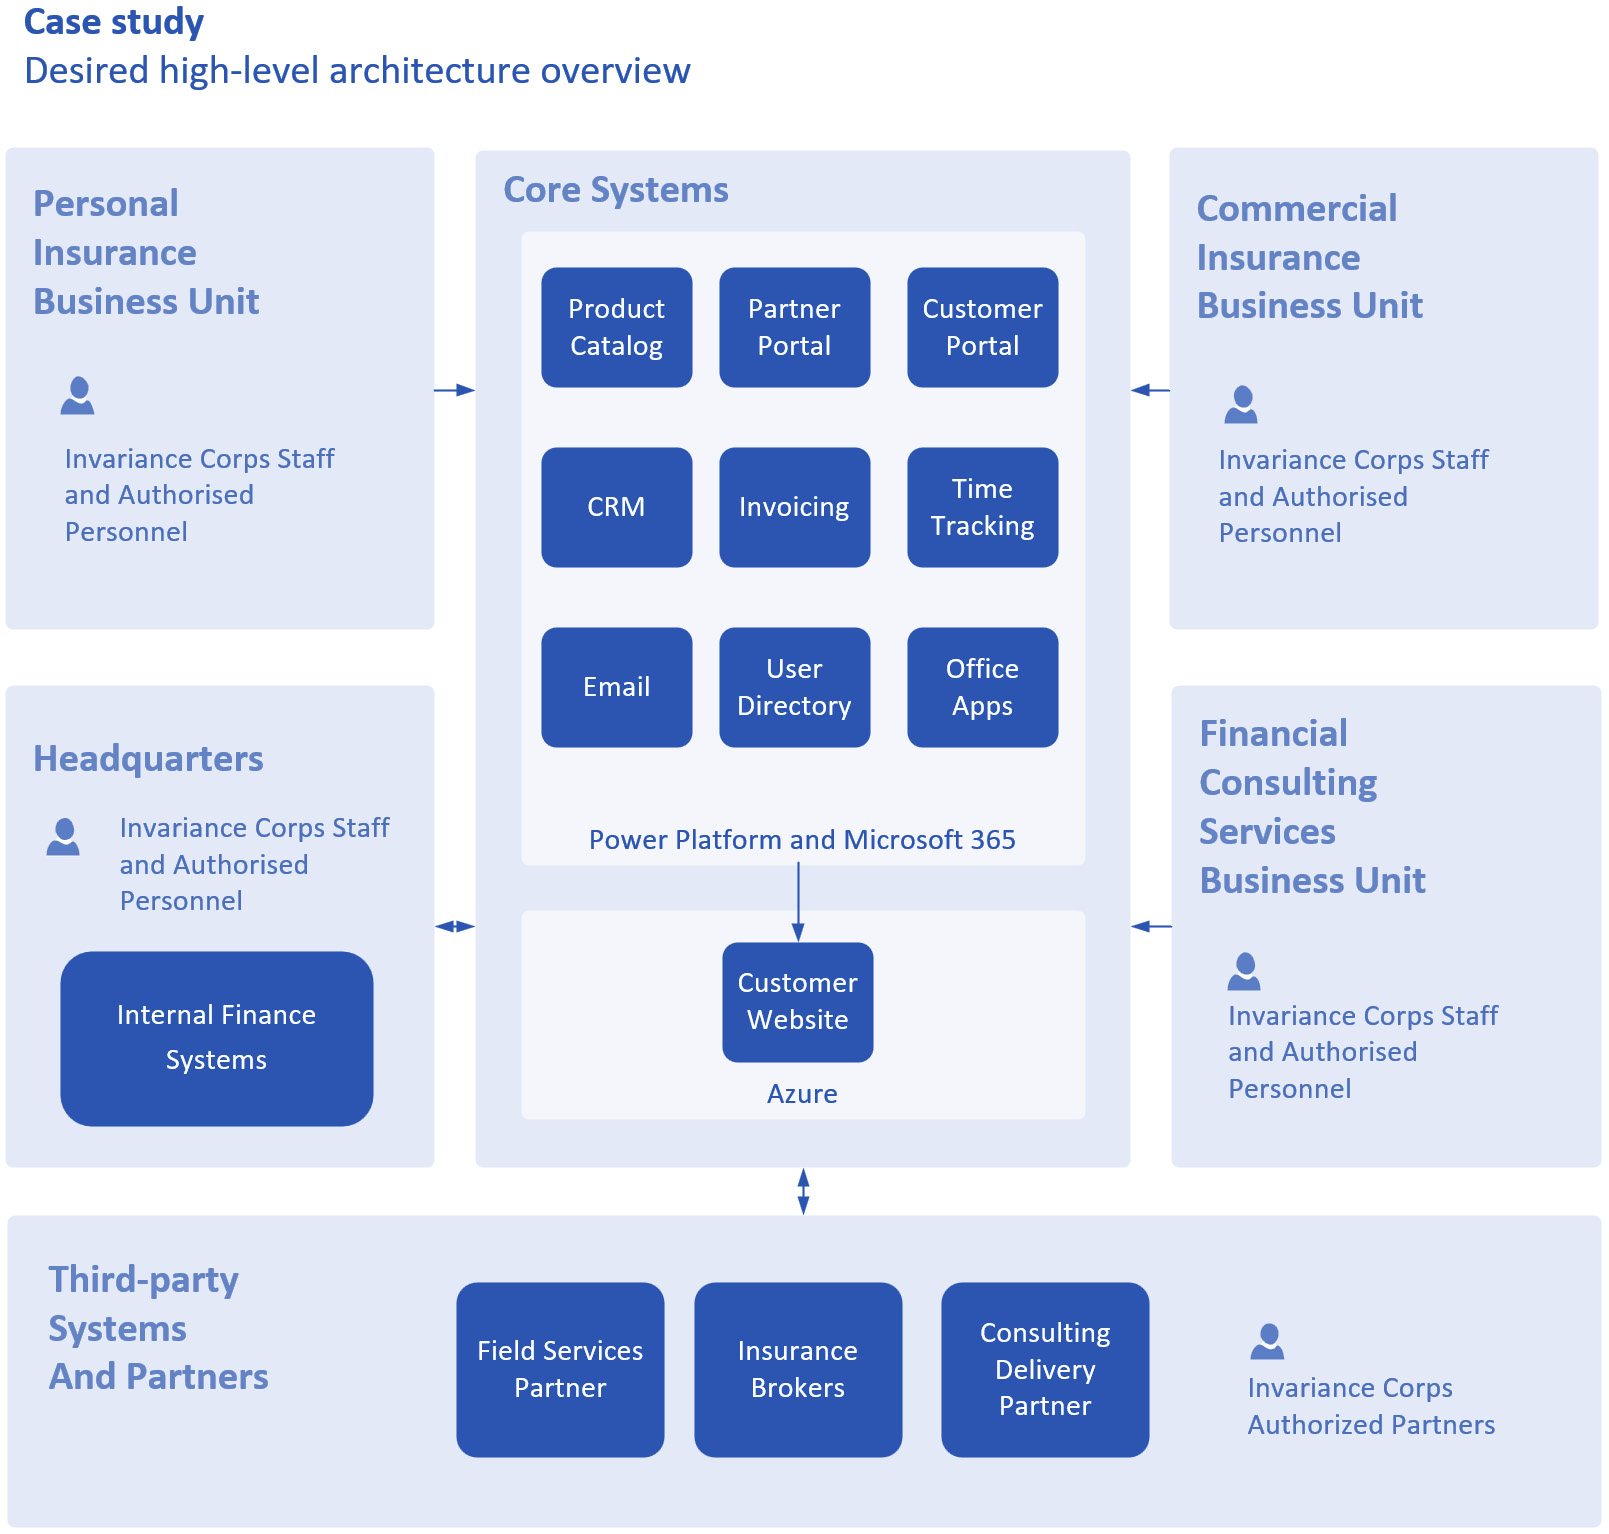 Figure 2.3 – Inveriance Corps architectural overview to-be
